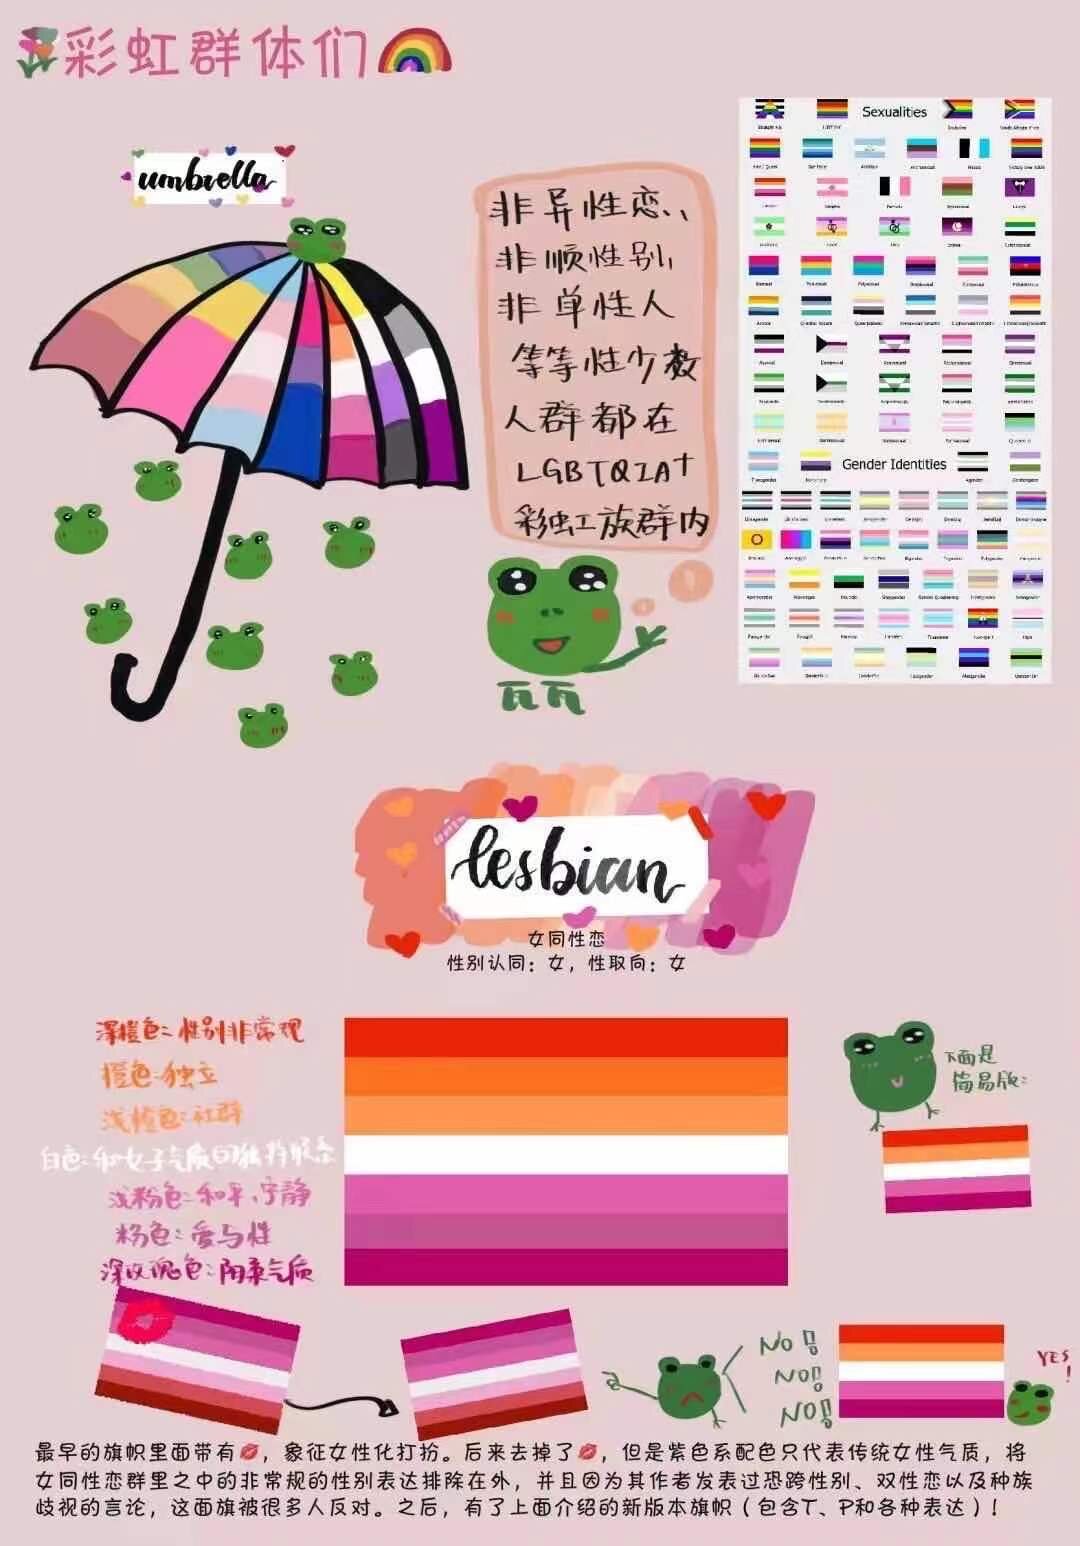 Jiyoung: In lieu of any personal photos alongside this week's episode, here are some useful LGBTQIA resources in Chinese [4].